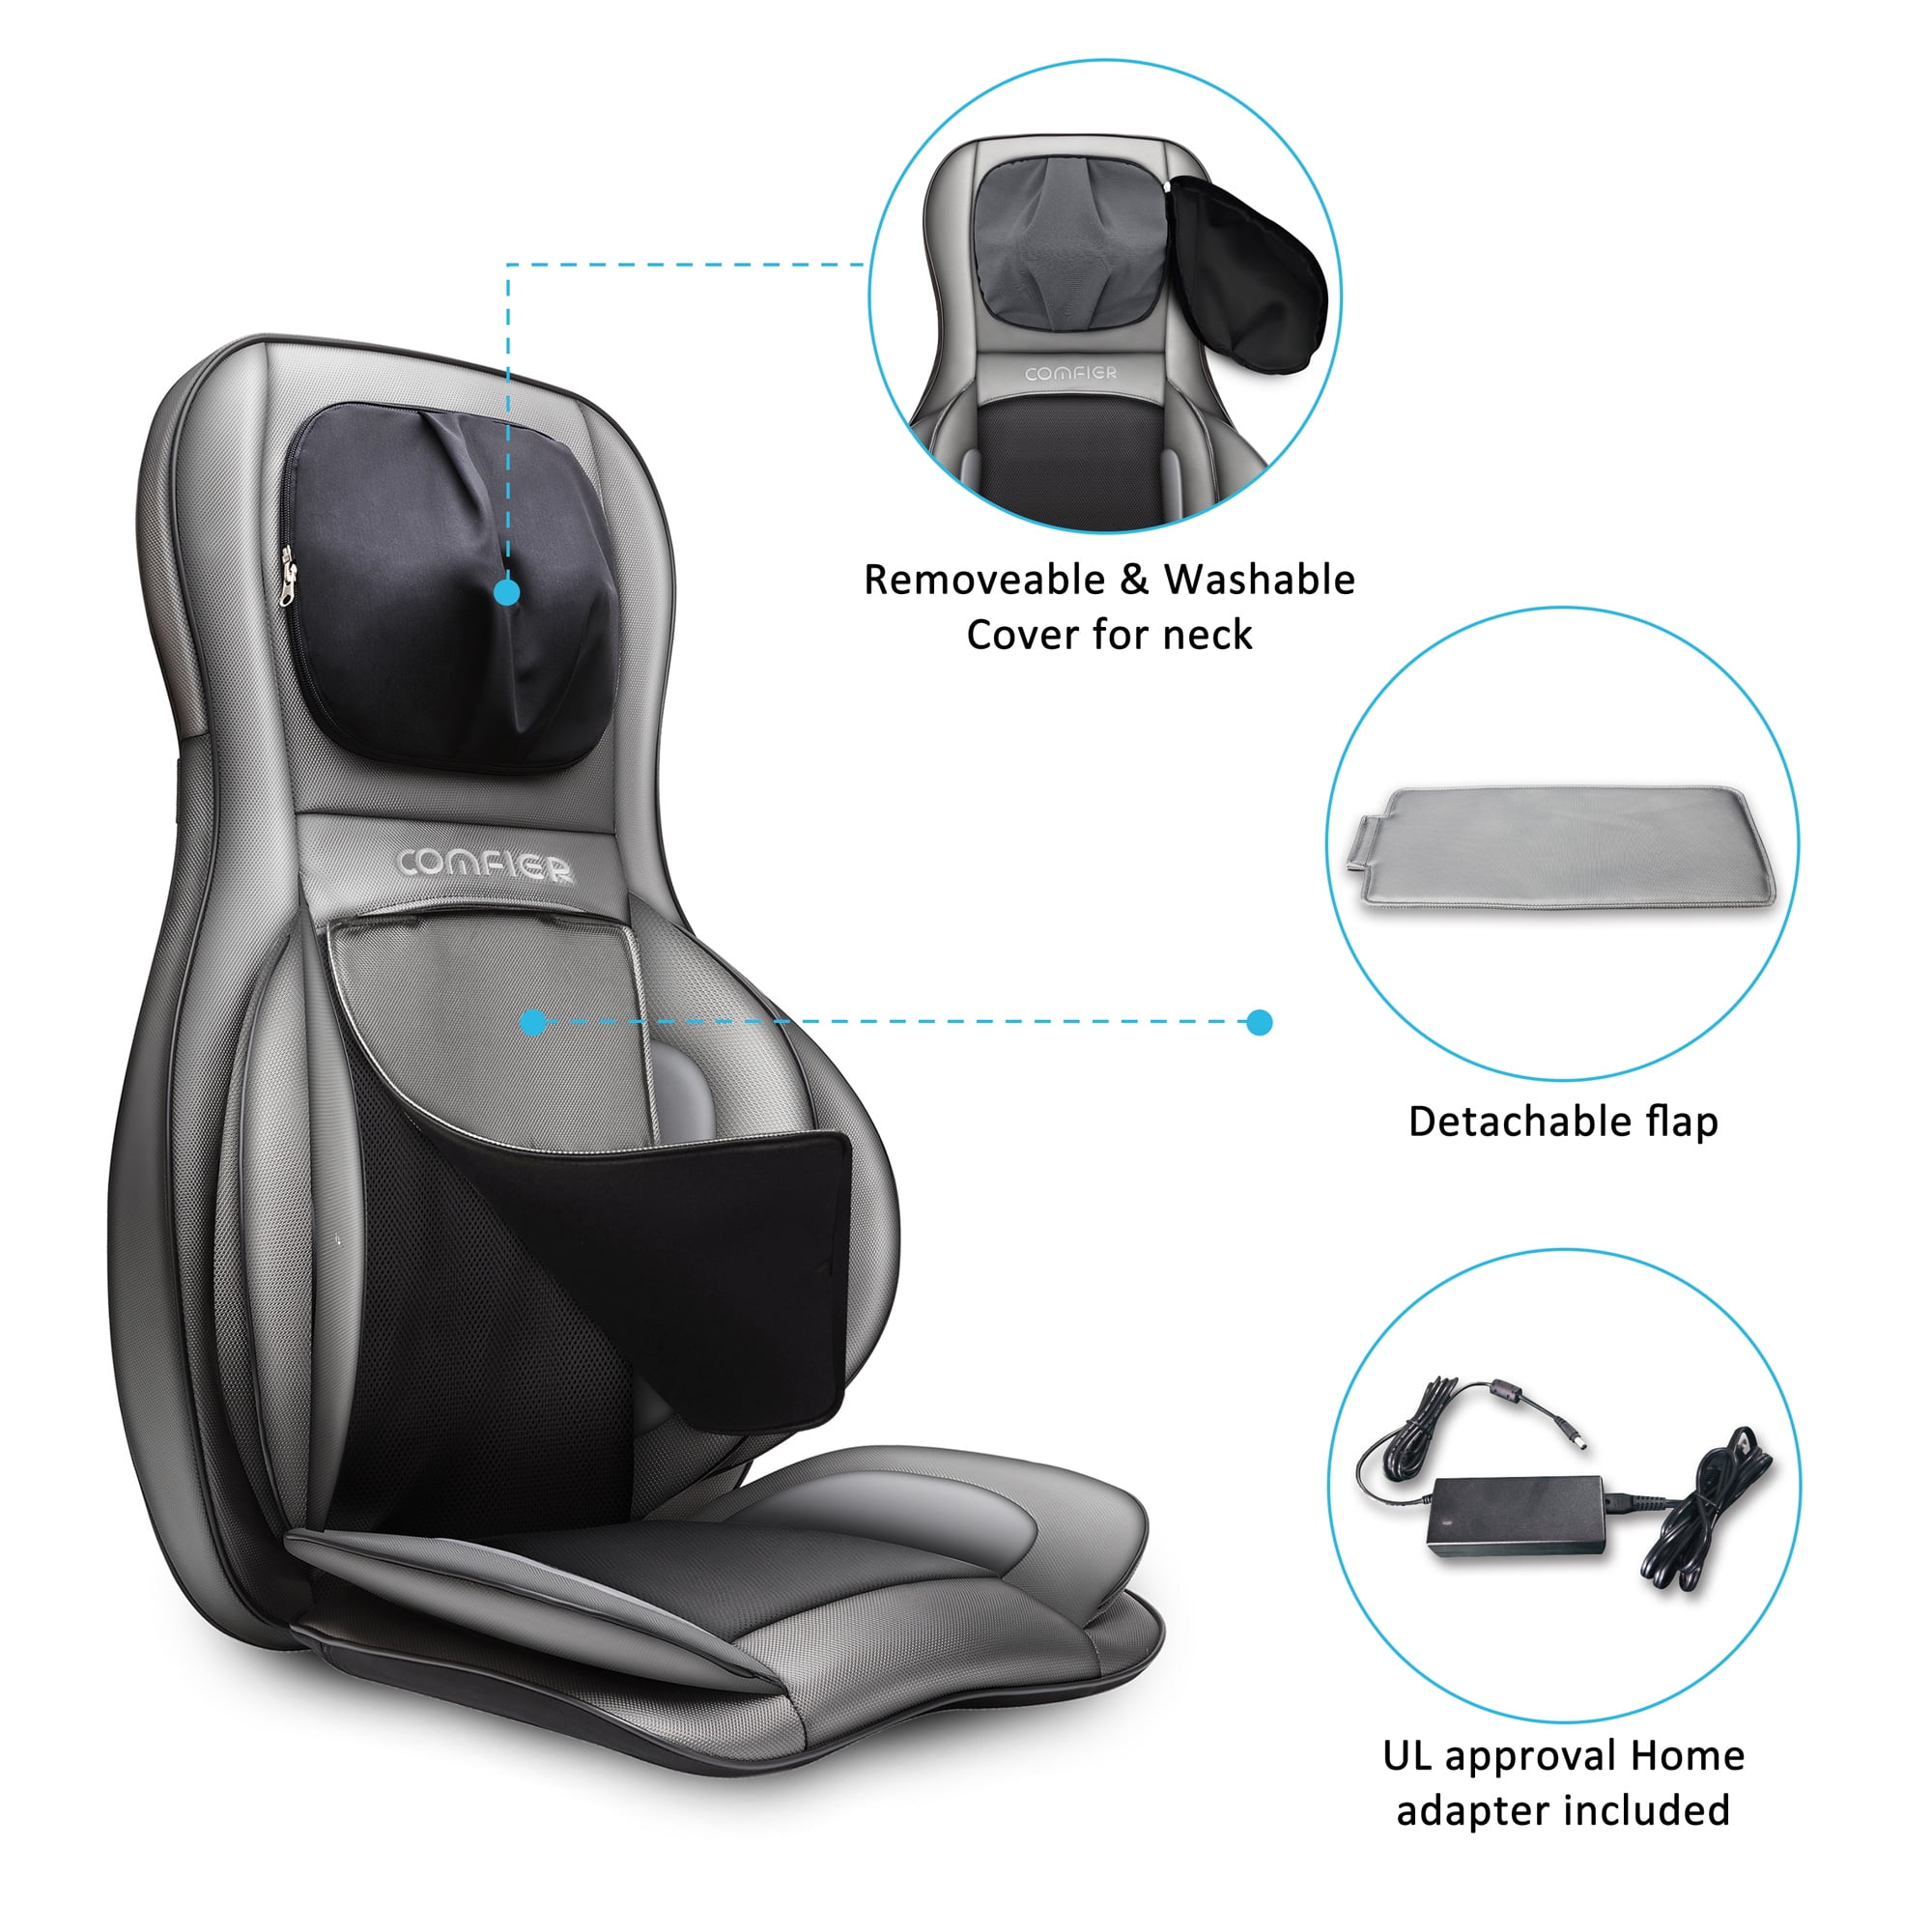 COMFIER Neck and Back Massager with Heat,Shiatsu Massage Chair Pad Portable  with Compress & Rolling,…See more COMFIER Neck and Back Massager with